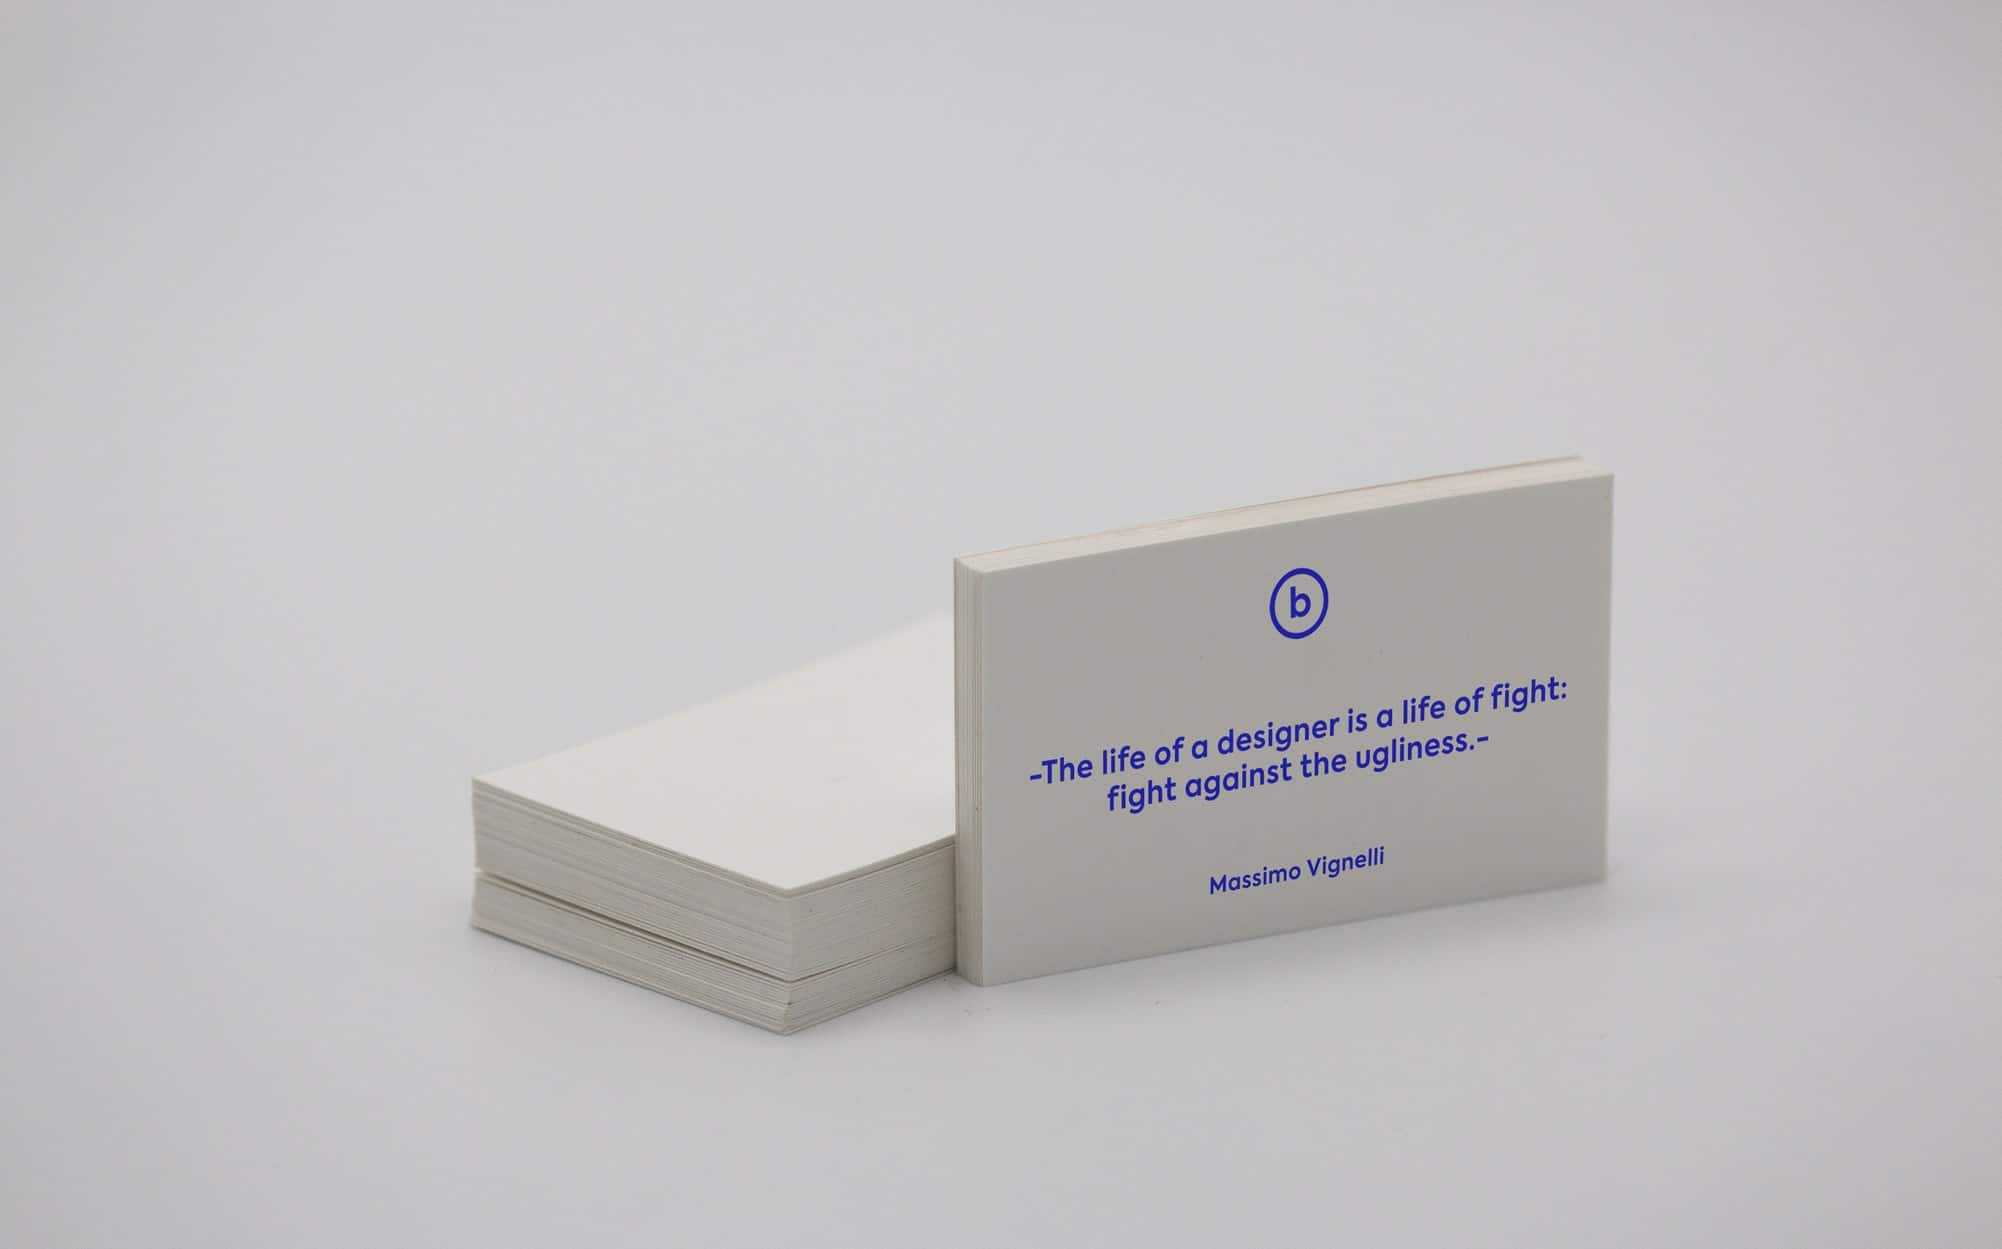 A professional business card.